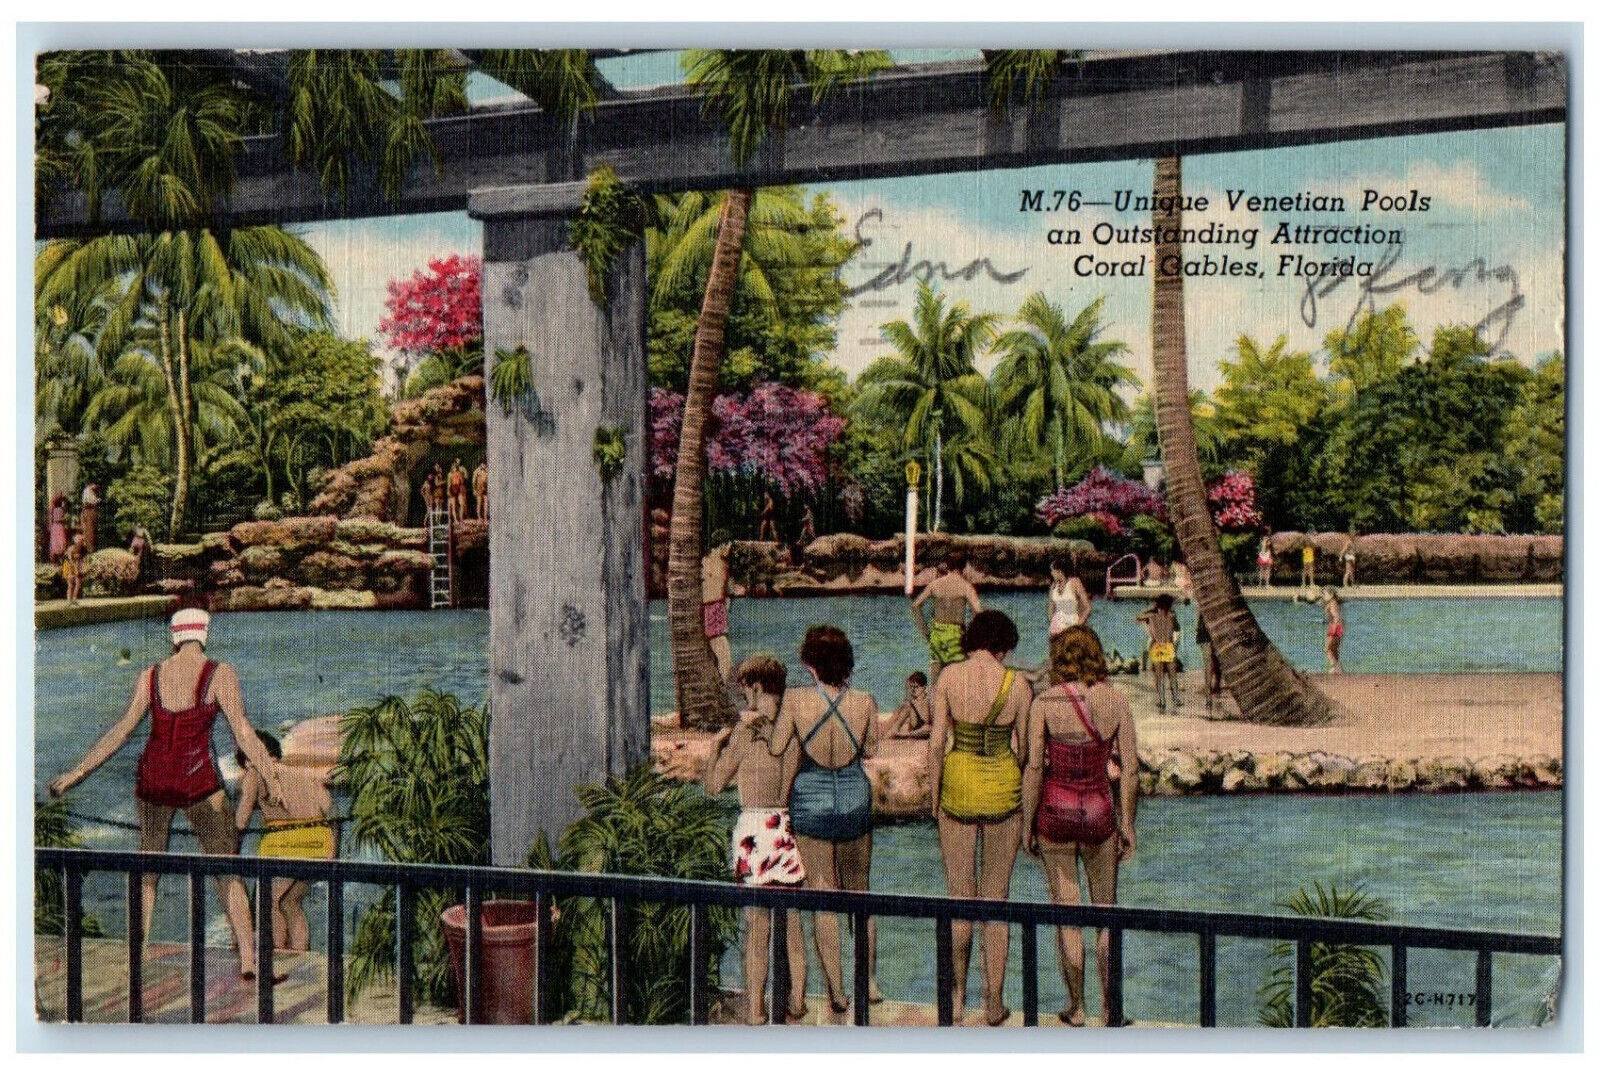 1953 Unique Venetian Pools and Outstanding Attraction Coral Gables FL Postcard